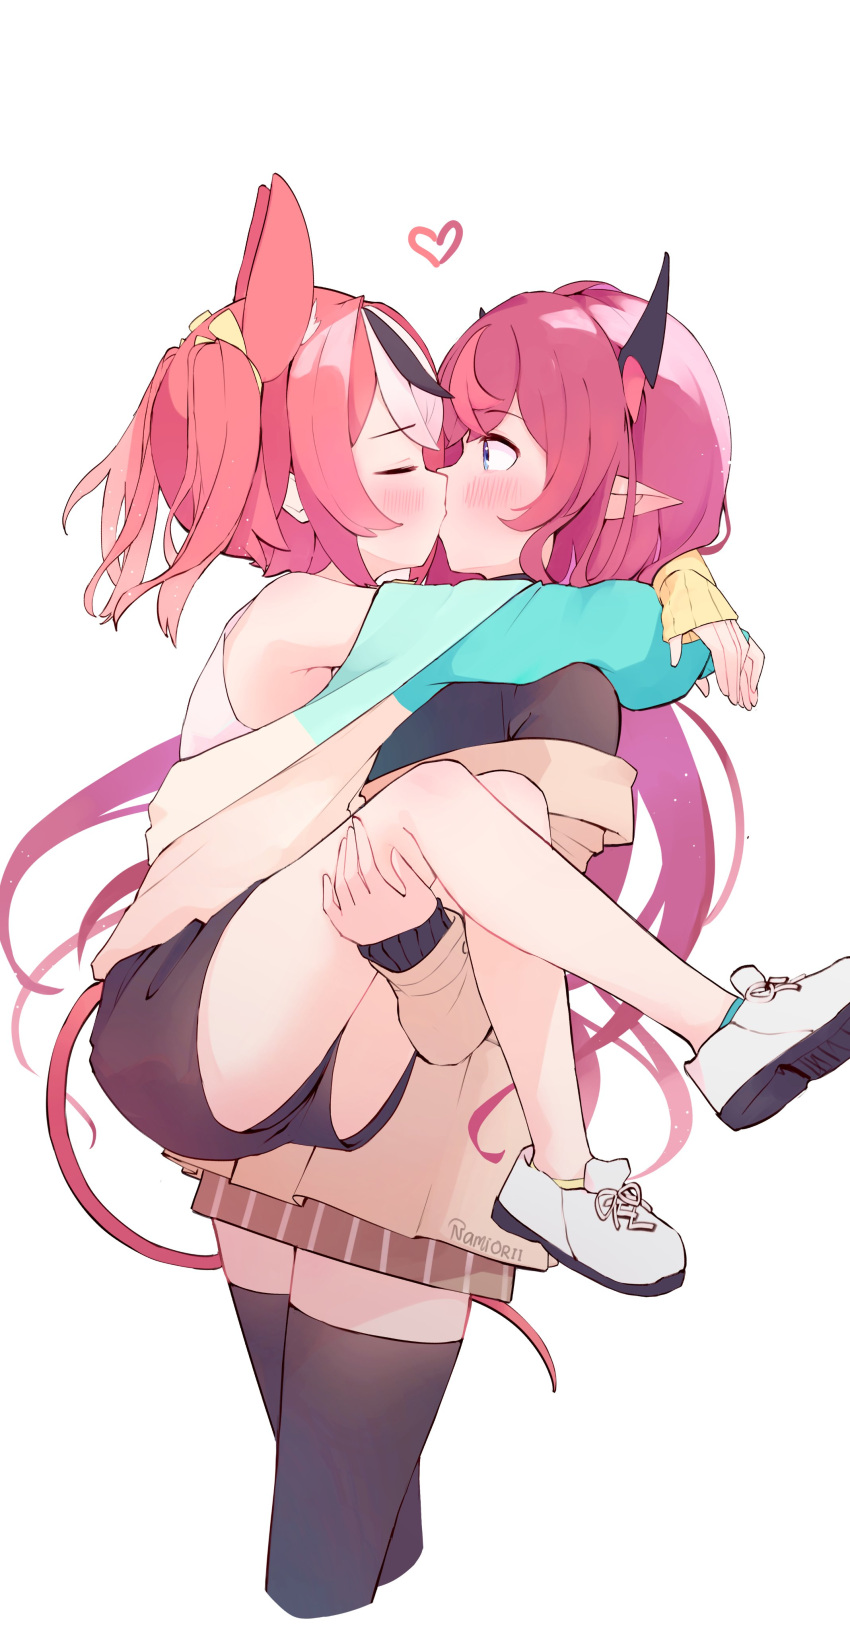 2girls absurdres animal_ears armpit_peek arms_around_neck bangs bare_legs bare_shoulders black_thighhighs carrying closed_eyes hakos_baelz heart highres holocouncil hololive hololive_english horns hug irys_(hololive) kiss legs long_hair medium_hair multiple_girls namiorii pointy_ears princess_carry red_hair short_shorts shorts standing thighhighs thighs wavy_hair white_background zettai_ryouiki